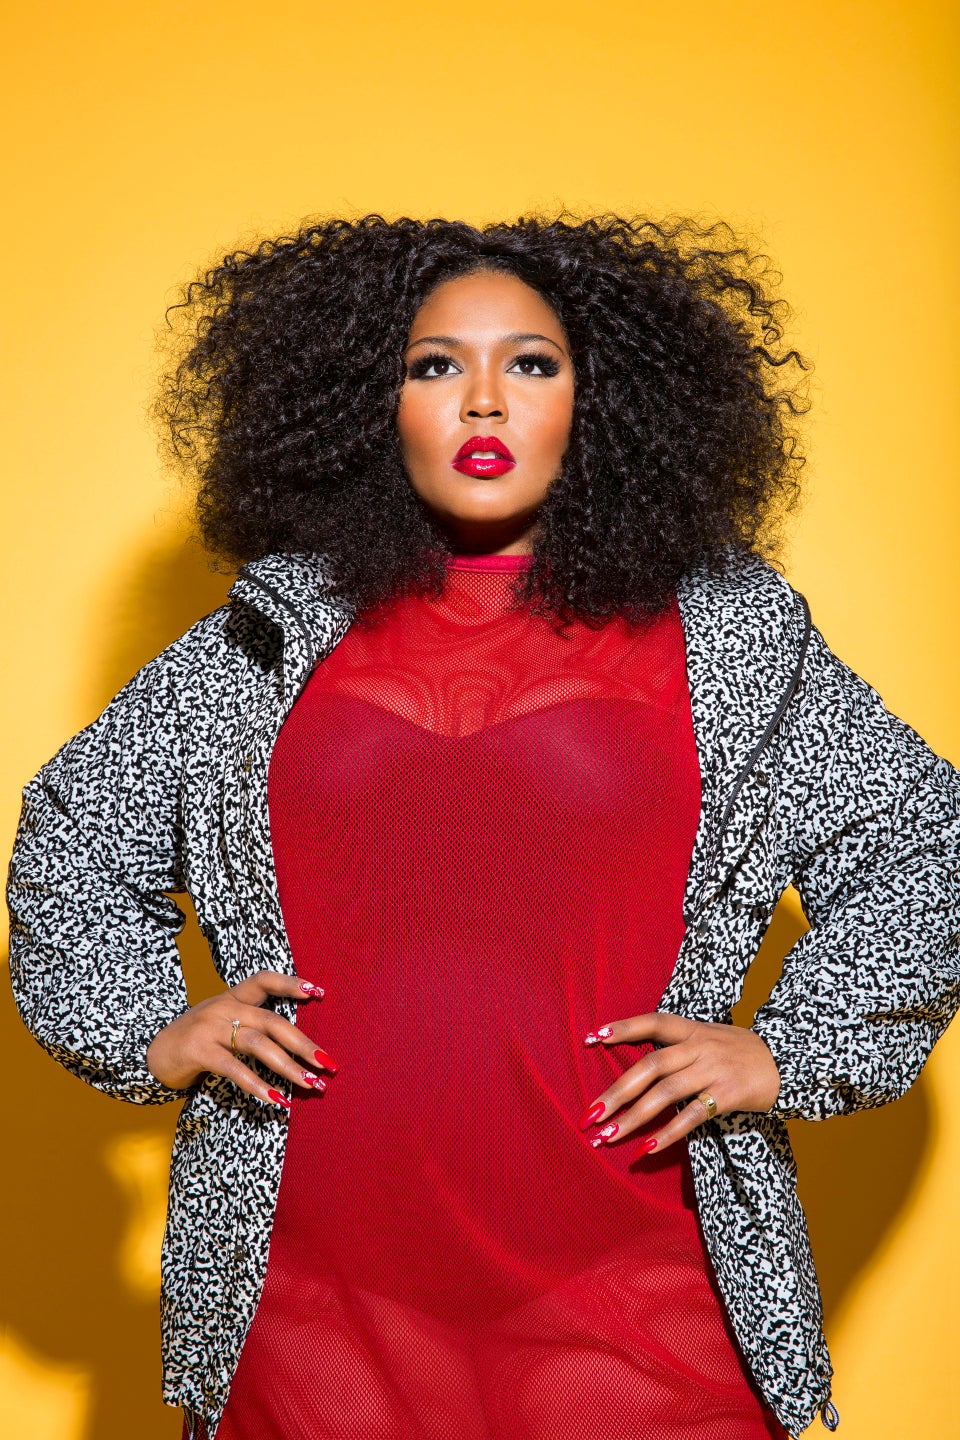 Lizzo’s ‘Scuse Me’ Video Is The Ultimate Ode To Curvy Girls